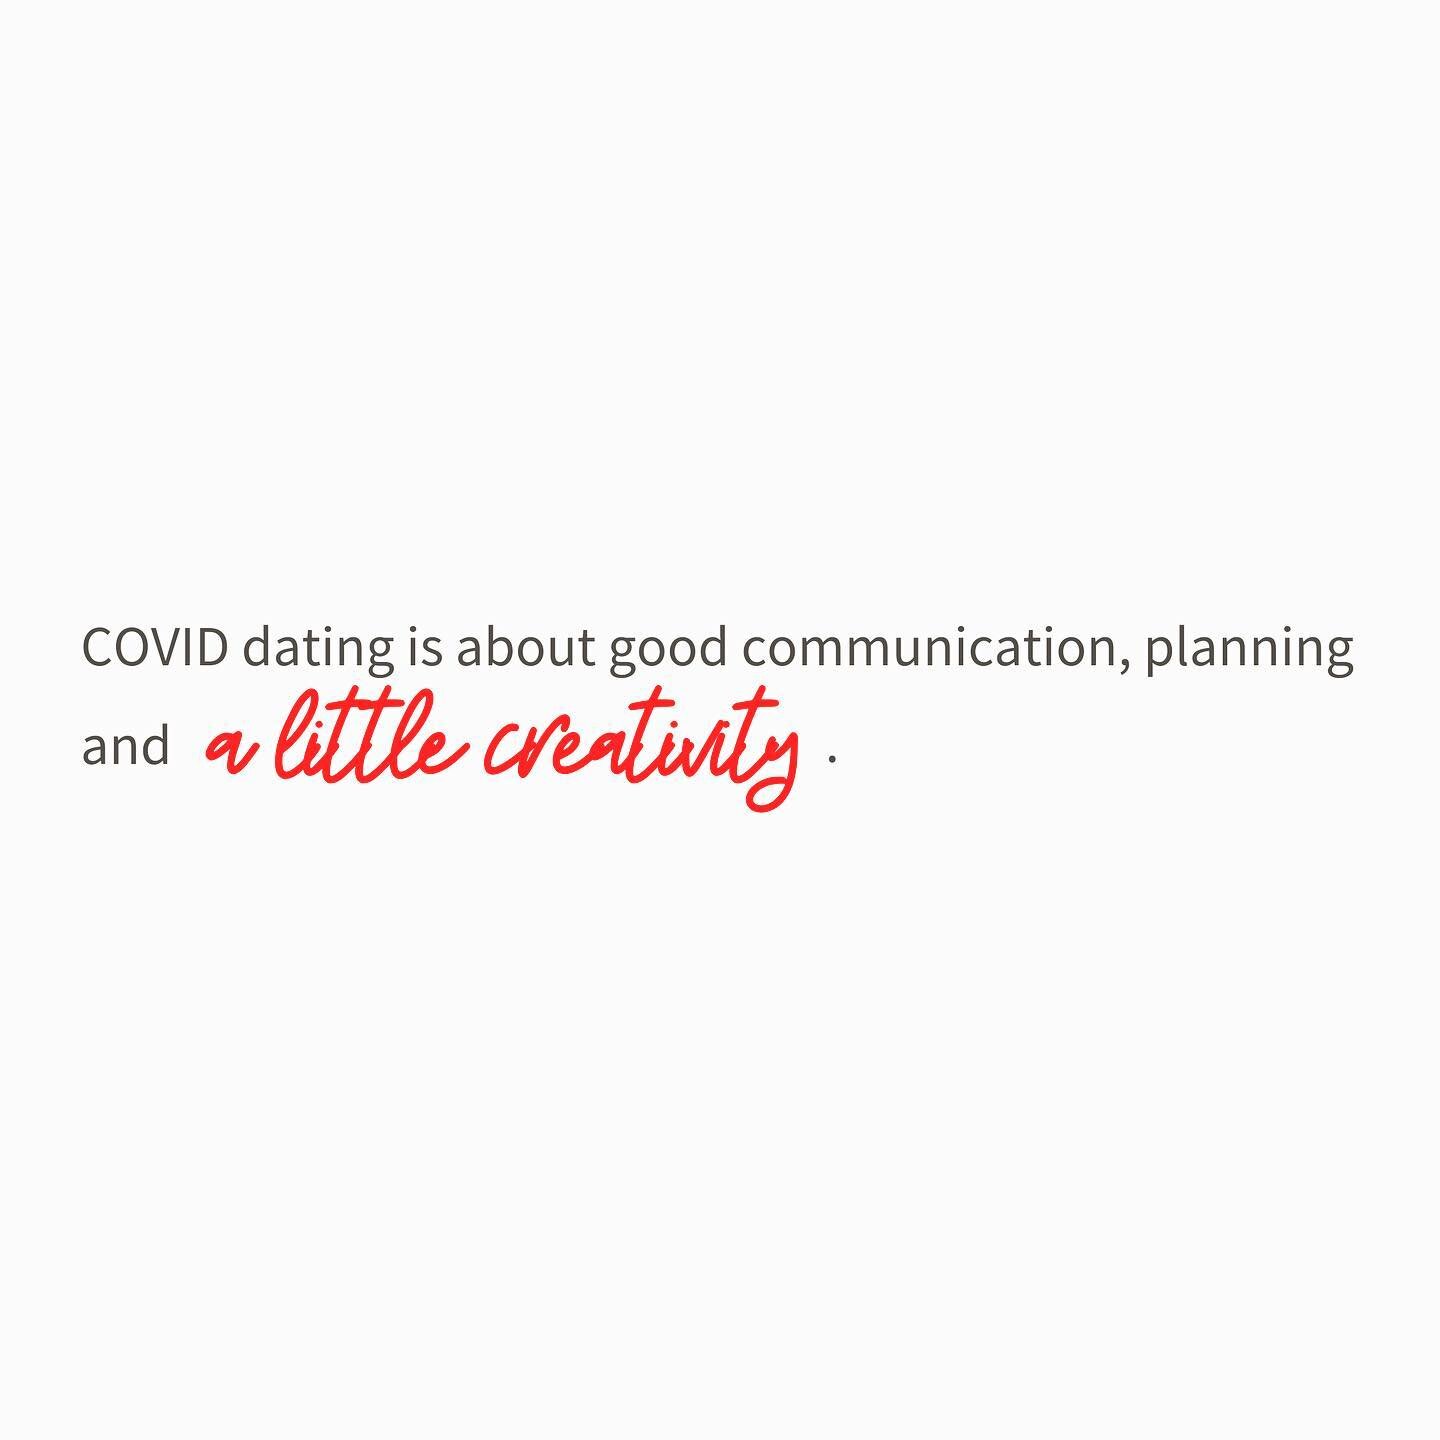 Whether you go virtual or IRL, for your next #coviddate - plan ahead, order and/or prepare food, ingredients, wine, and spirits to arrive as close to the beginning of your date as possible so the transition to talking is smooth and the activity helps